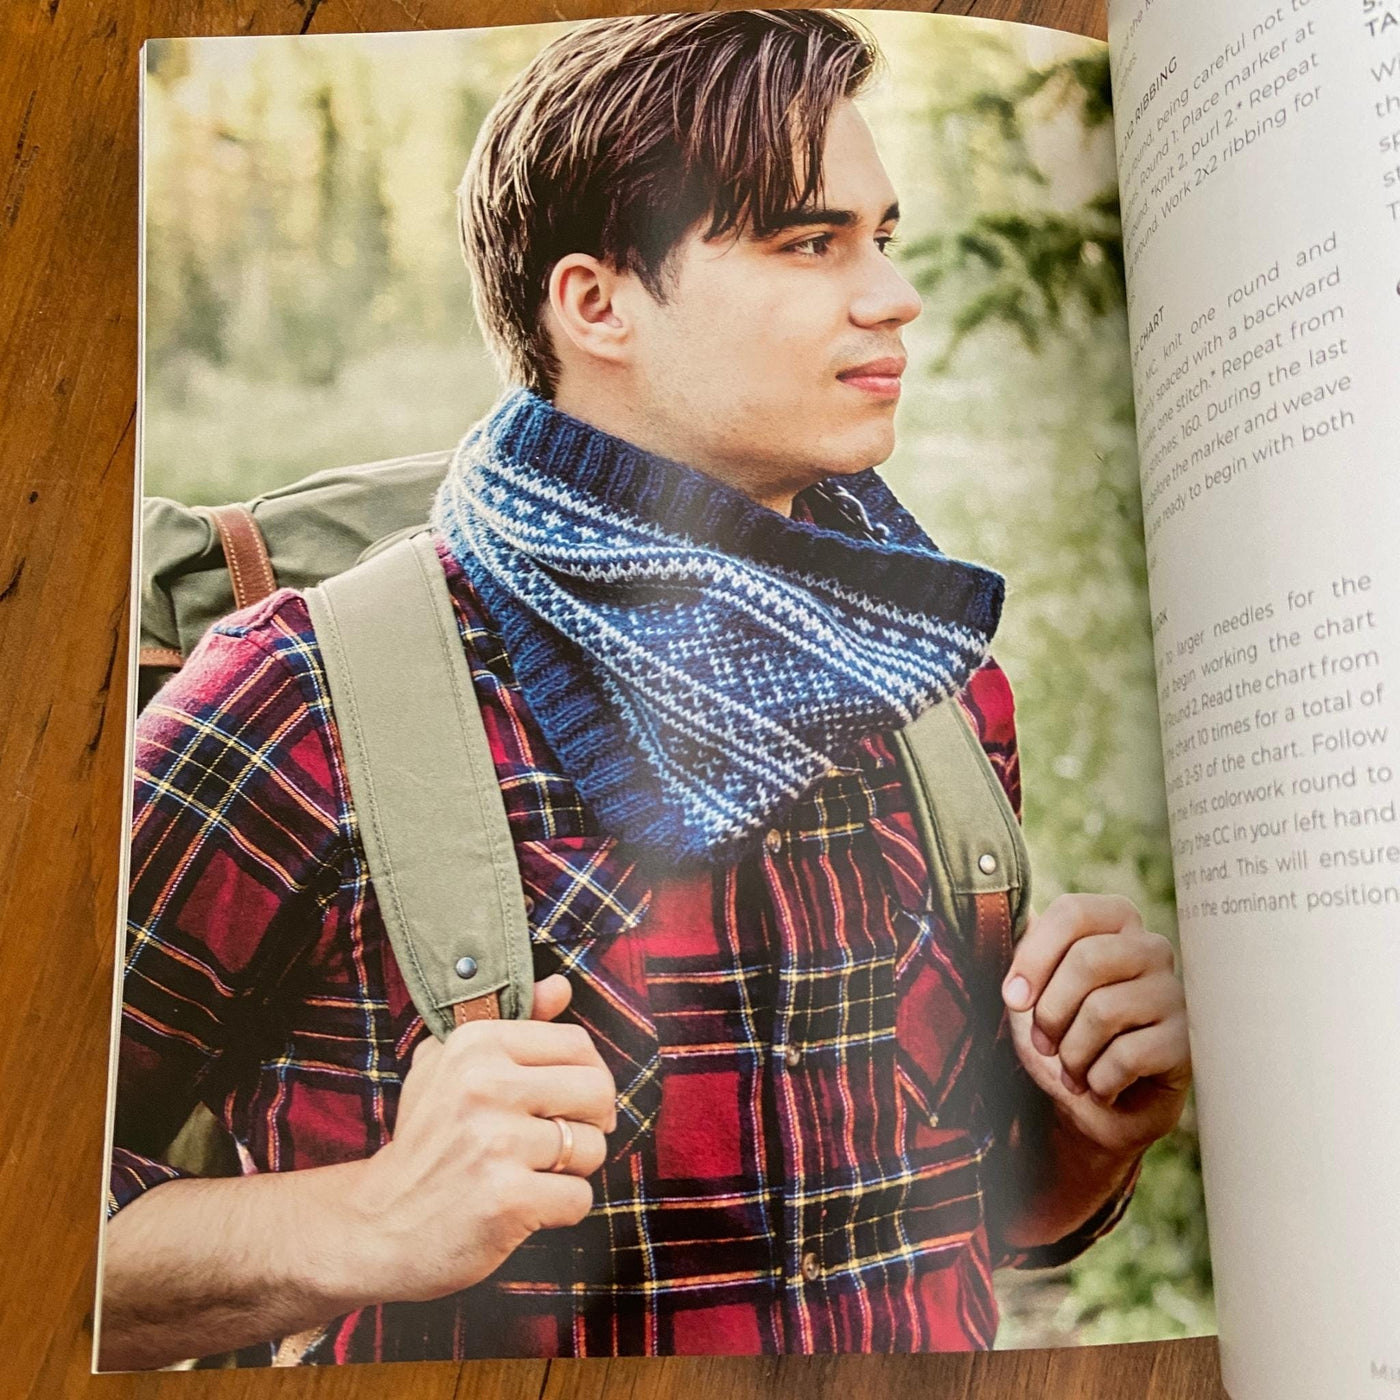 Page of Nordic Knitting Primer book with man in flannel wearing blue and cream colorwork cowl.